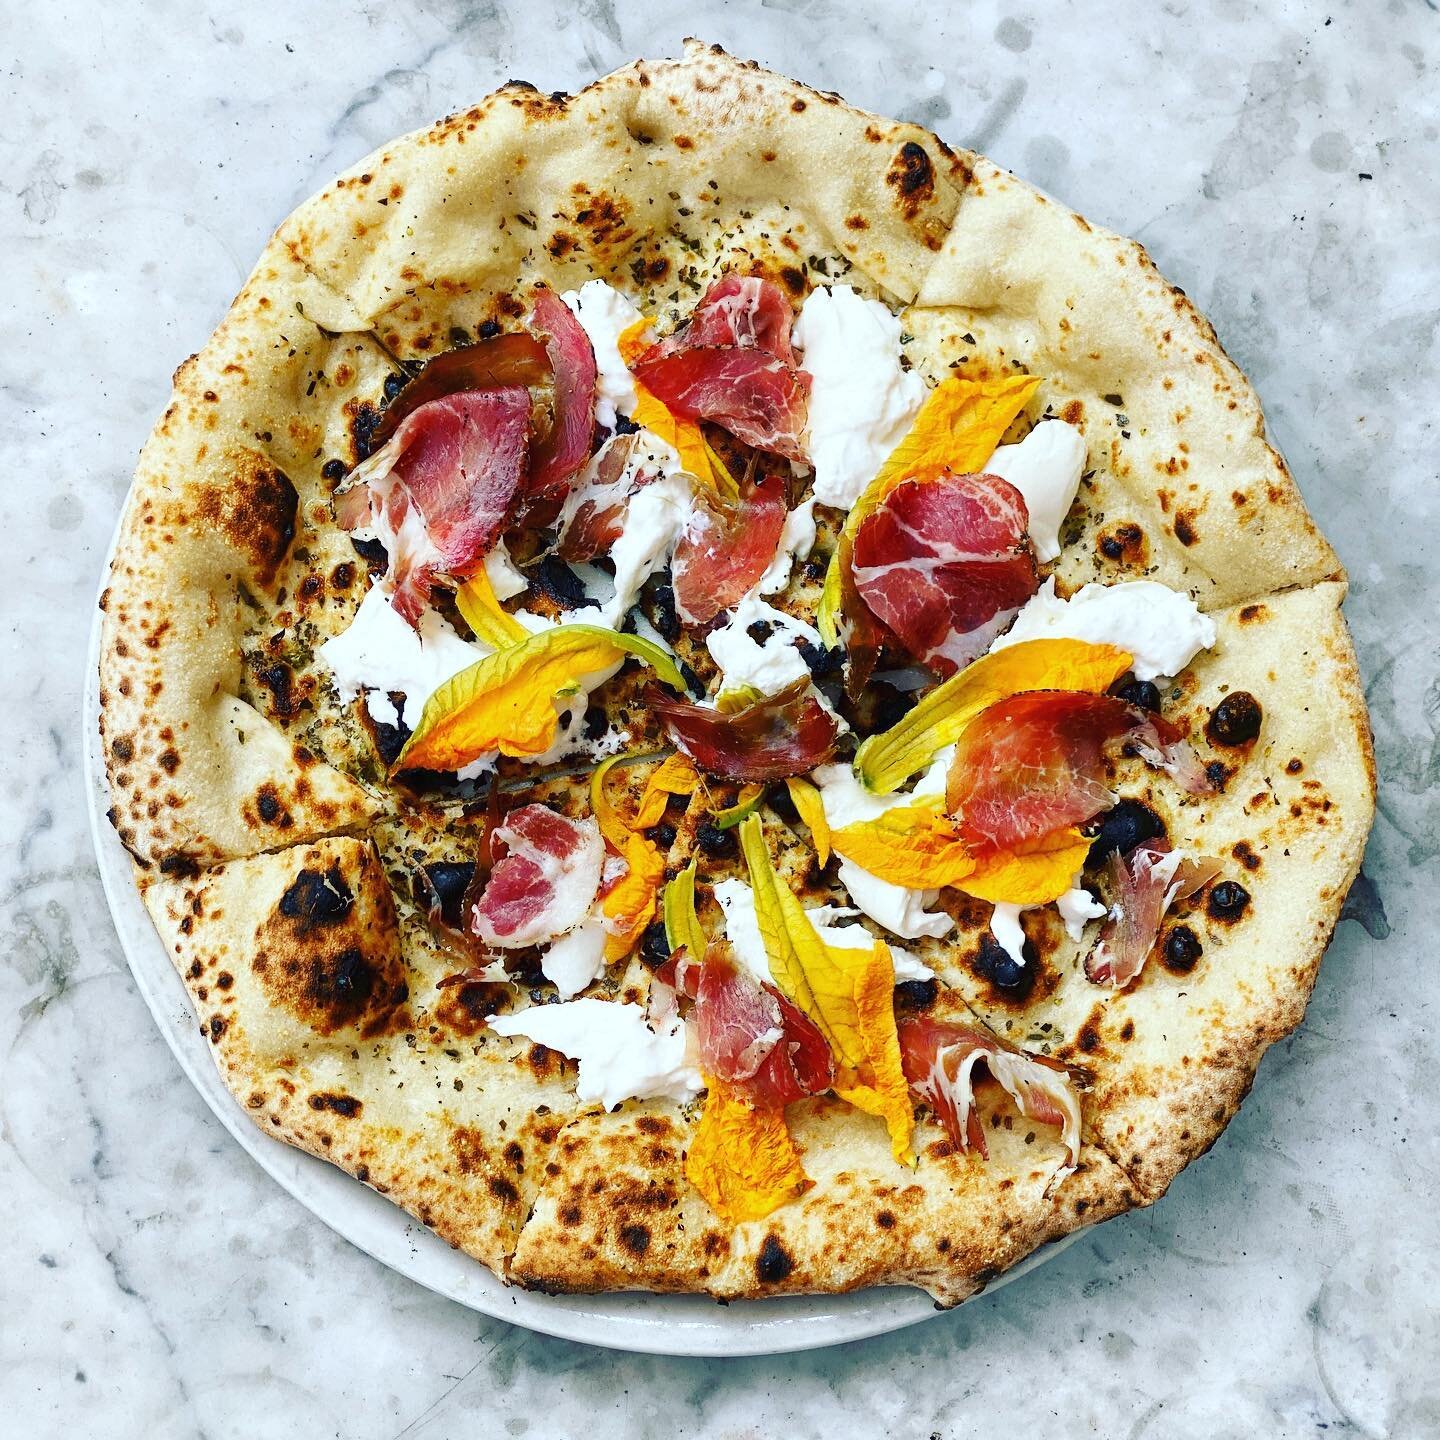 This Pizza Special is a seasonal delight with tangy Burrata, earthy Coppa, and slightly sweet zucchini blossoms all served on a perfect focaccia. 
#food #yummy #pizza #betterthannonnas